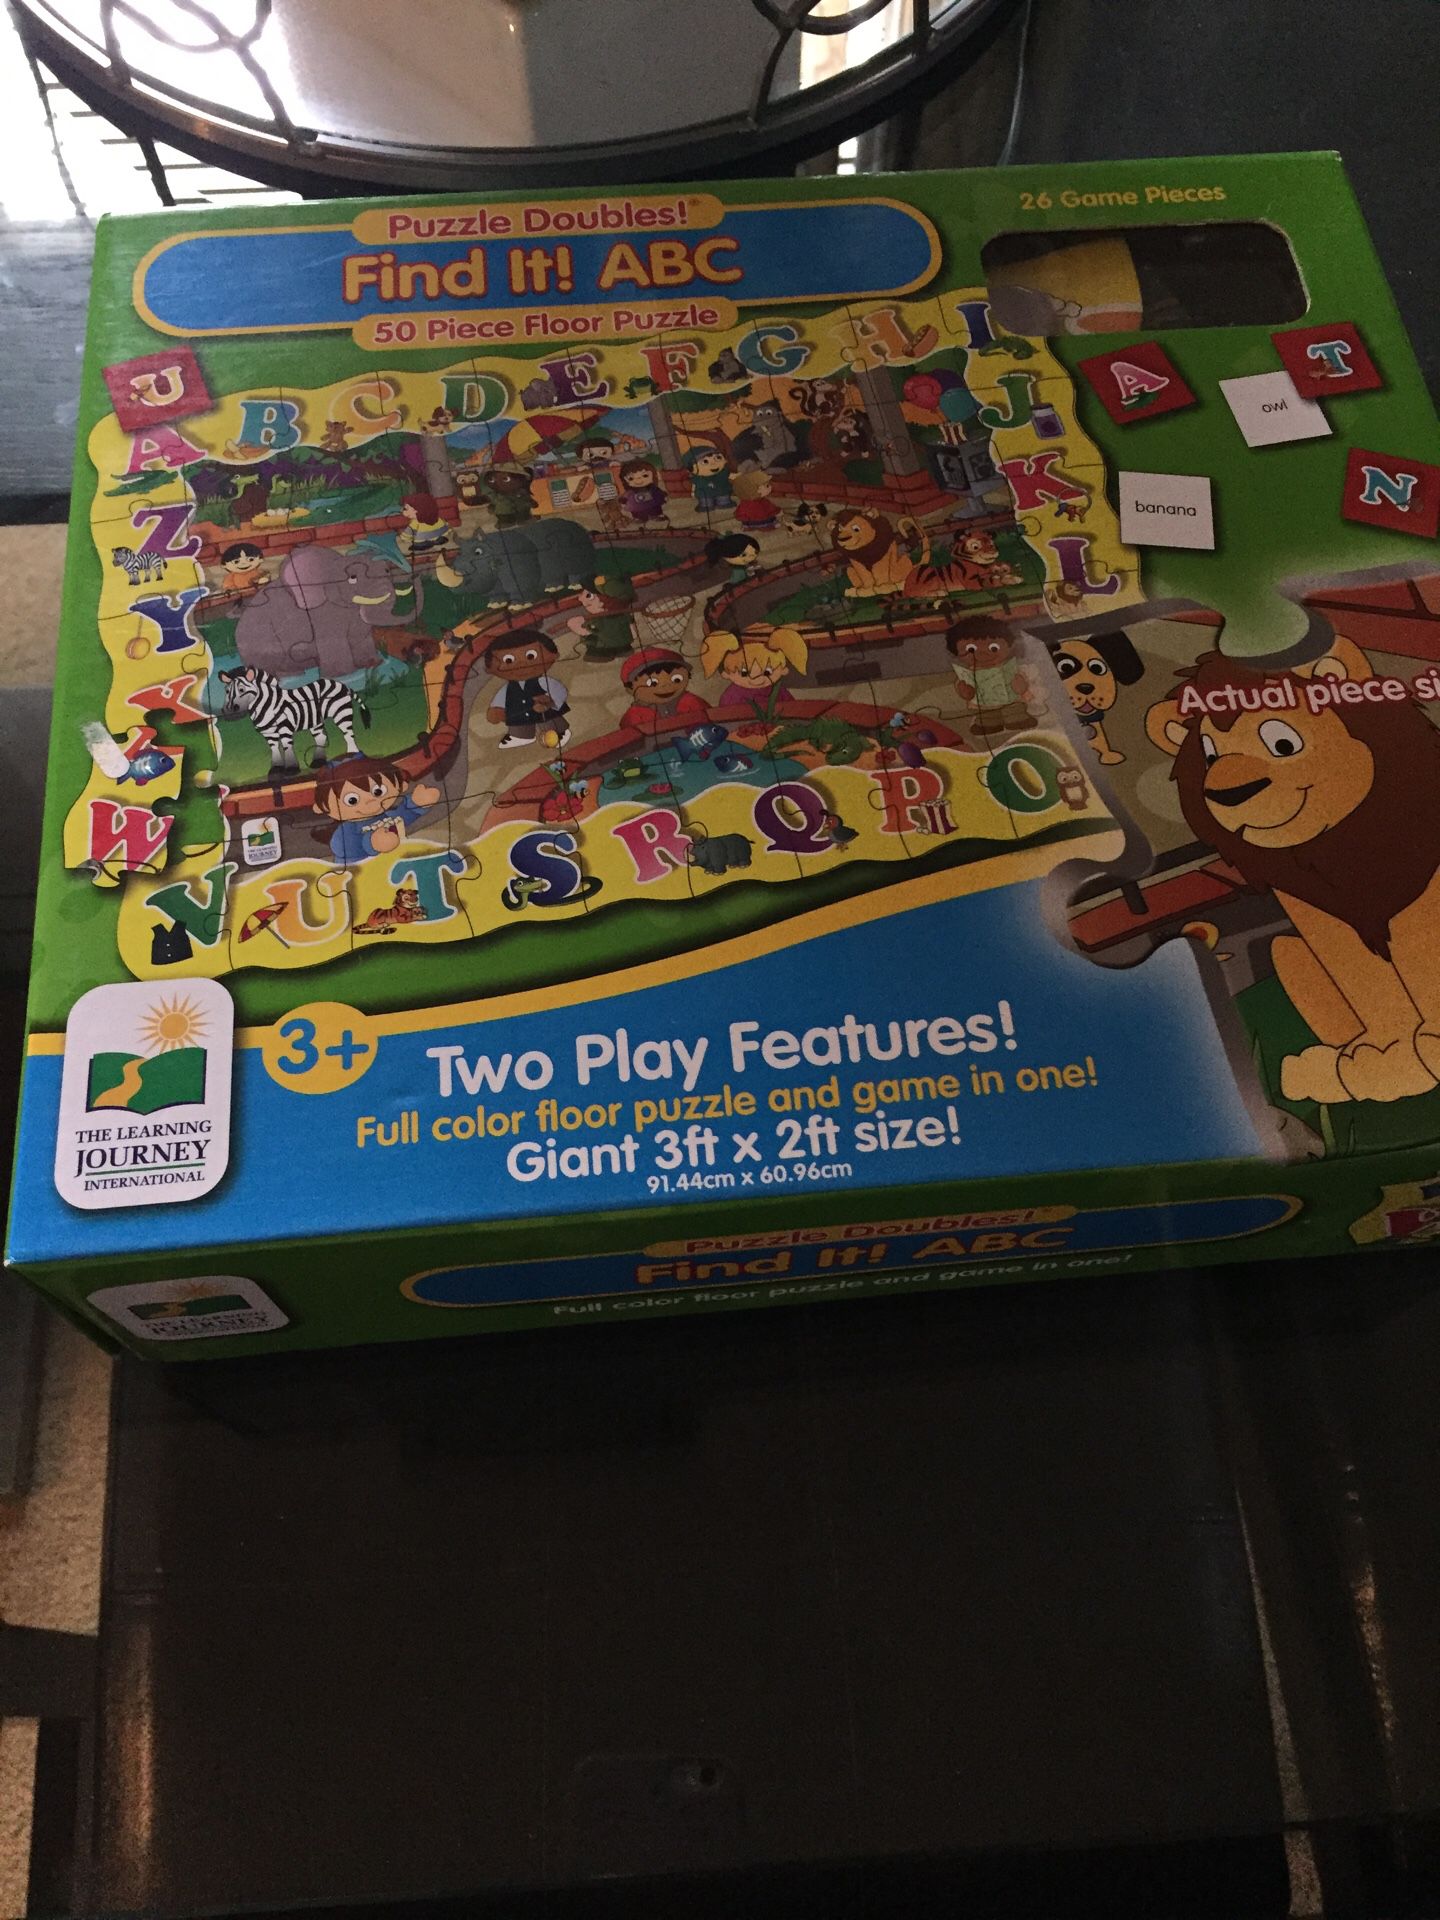 ABC puzzle and game